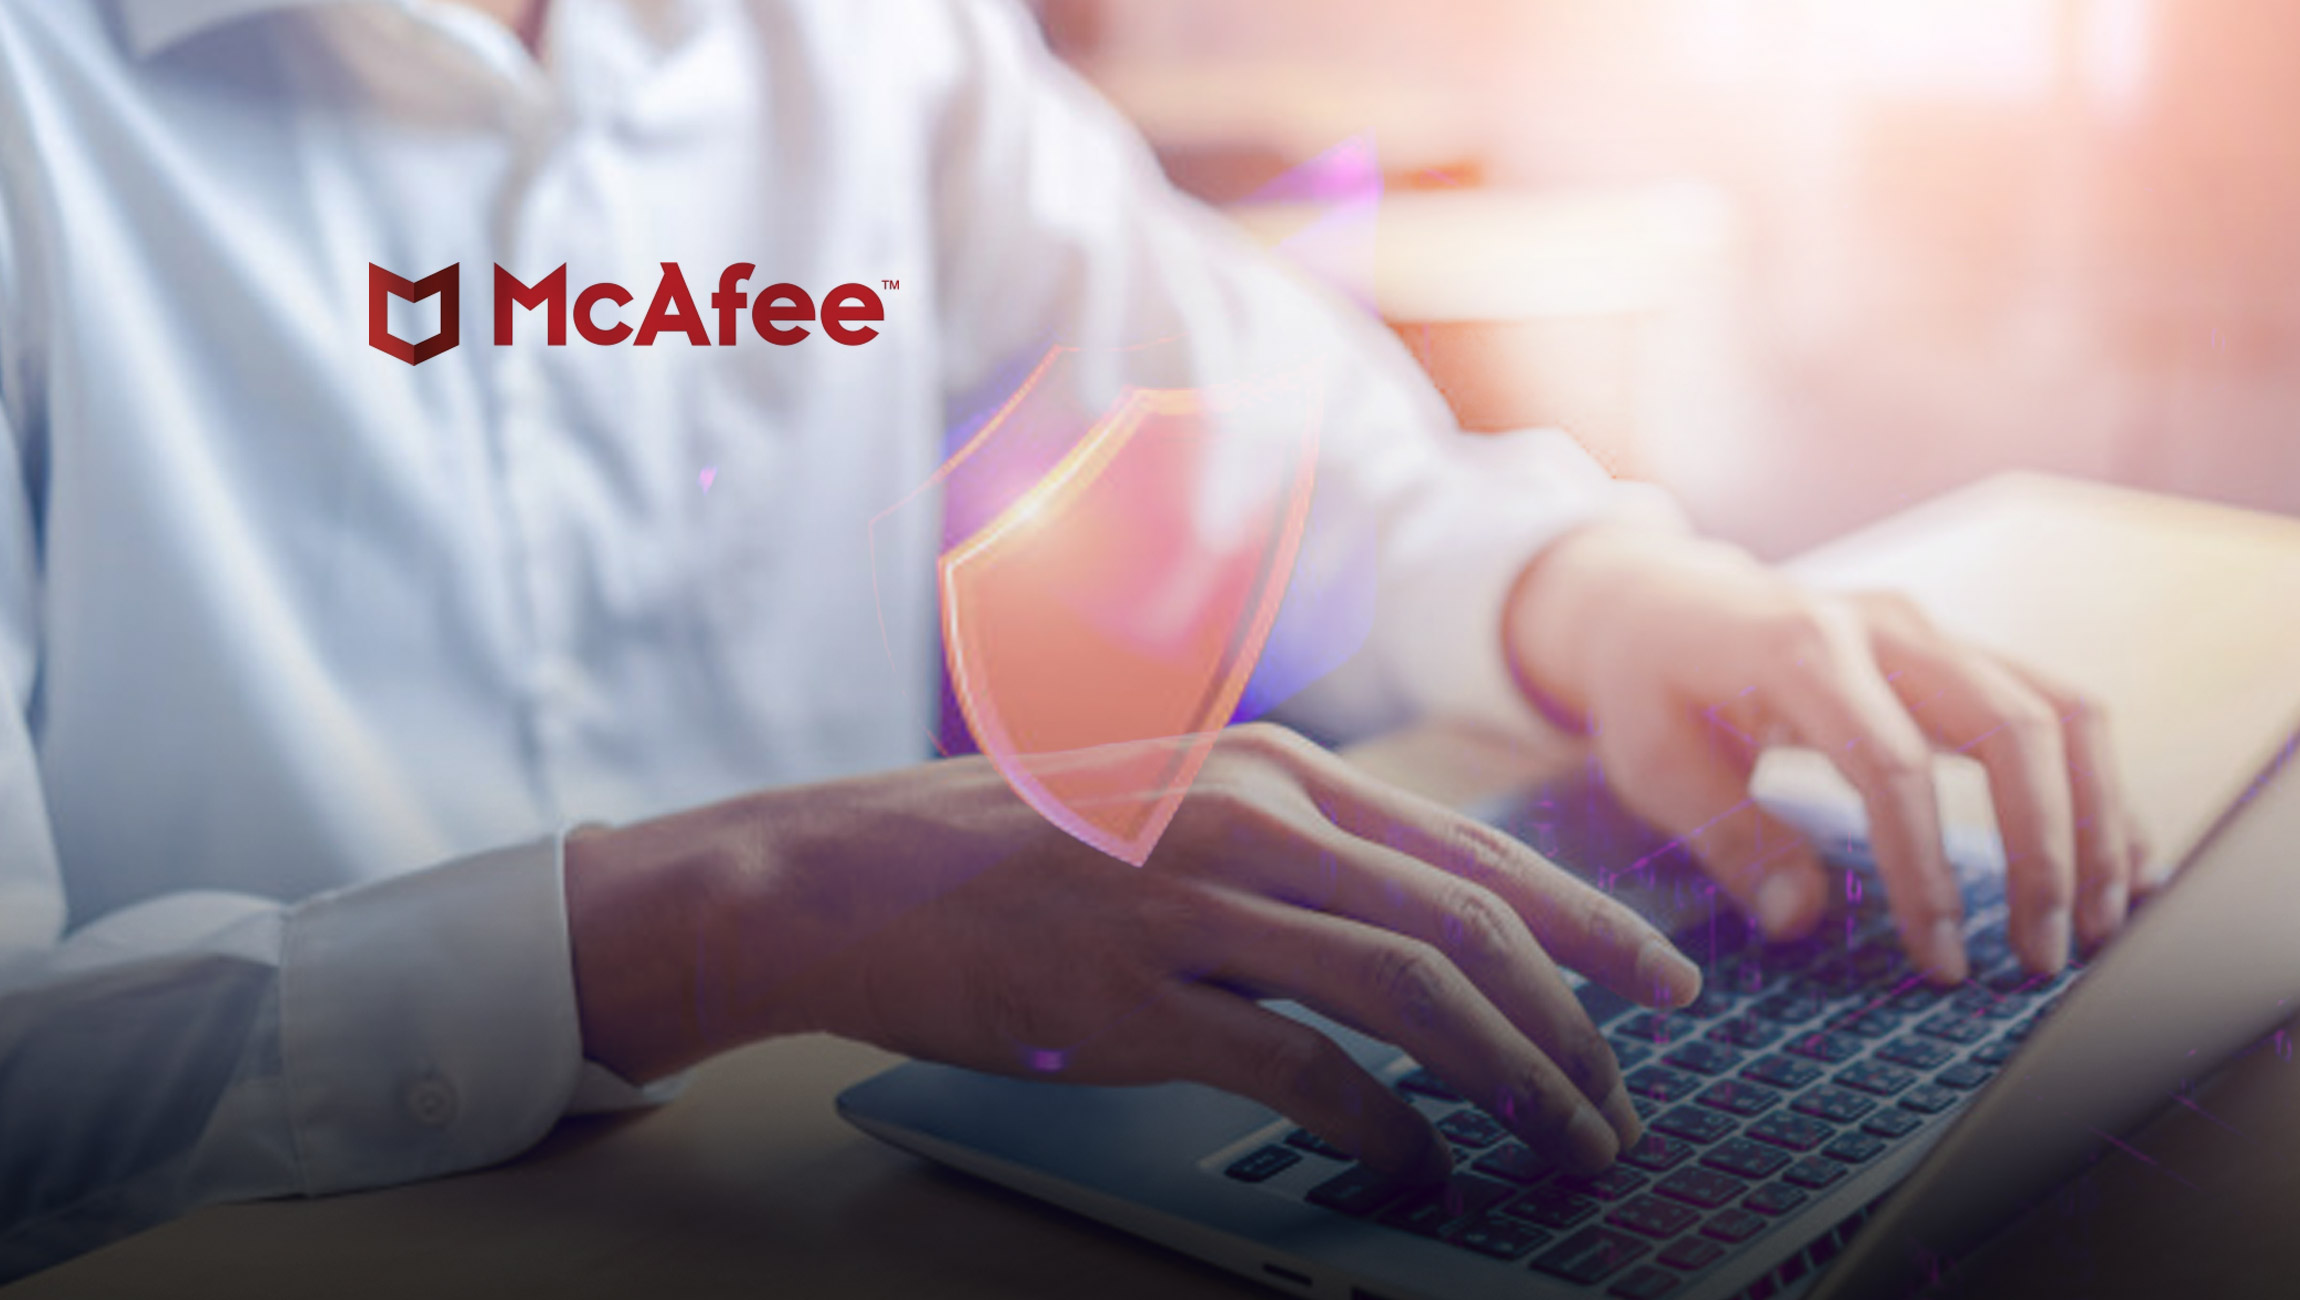 McAfee Revolutionizes Its Endpoint Security Platform With Industrys First Proactive Solution to Help Organizations Stay Ahead of Emerging Threats